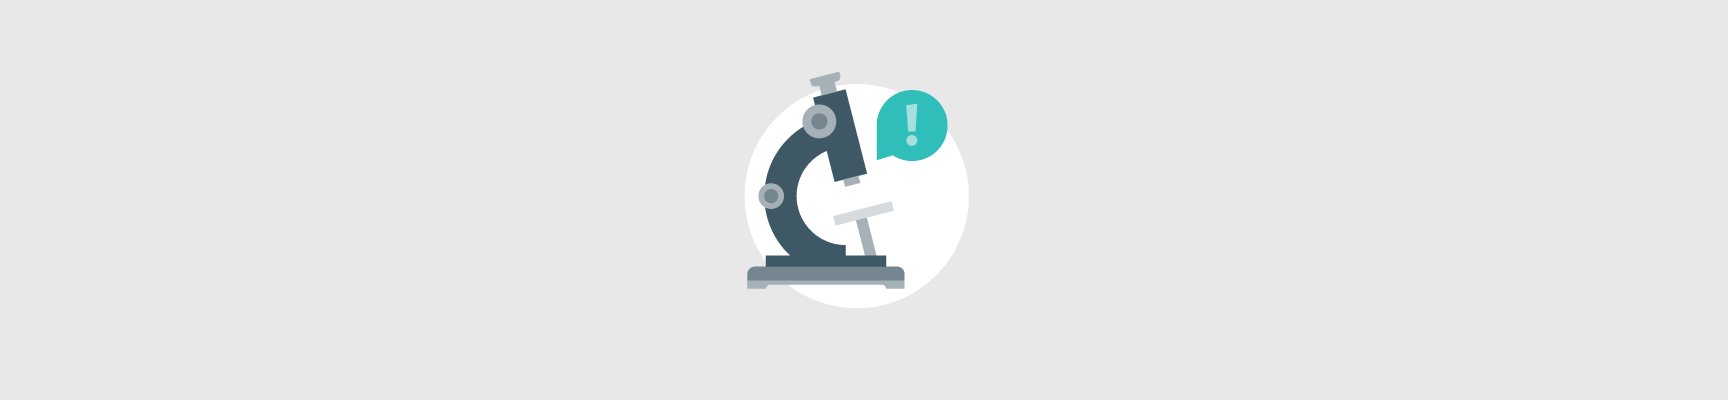 Microscope icon on a light grey background